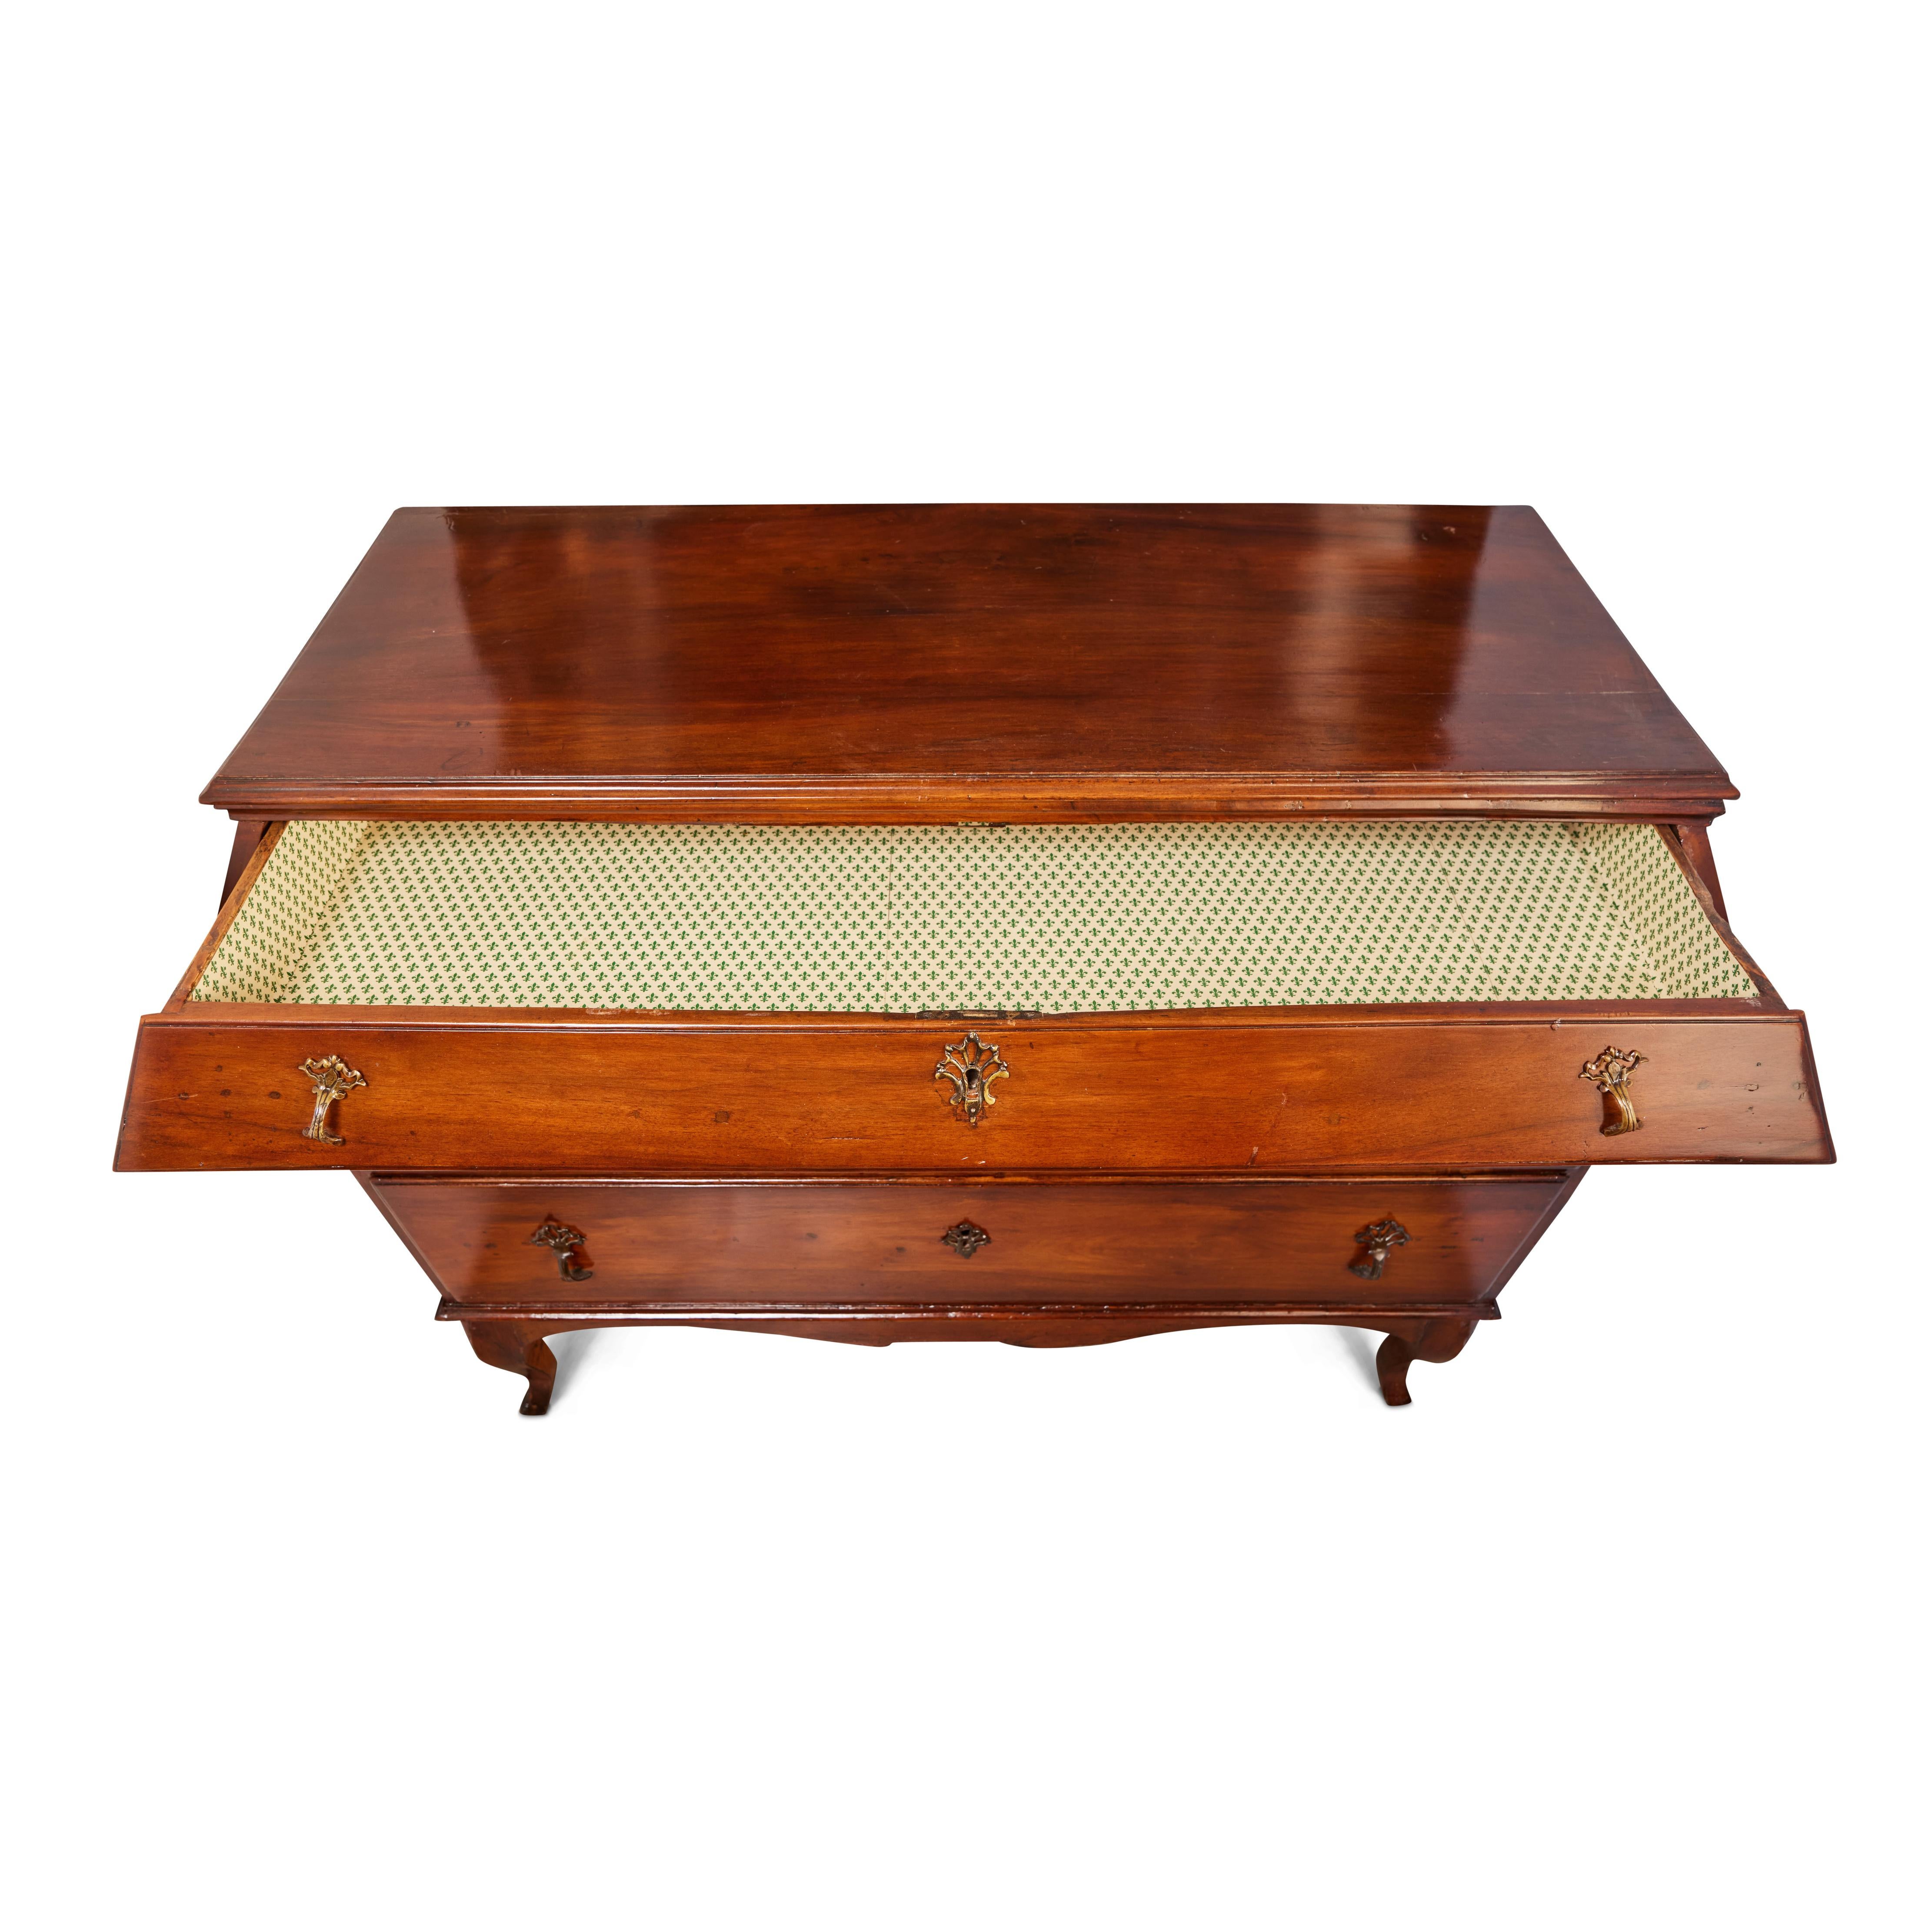 A striking, Venetian, solid pearwood, canted edge, tapering three drawer commode. The whole above a scrolling apron and sitting on petite, cabriole legs. Original gilt bronze hardware.